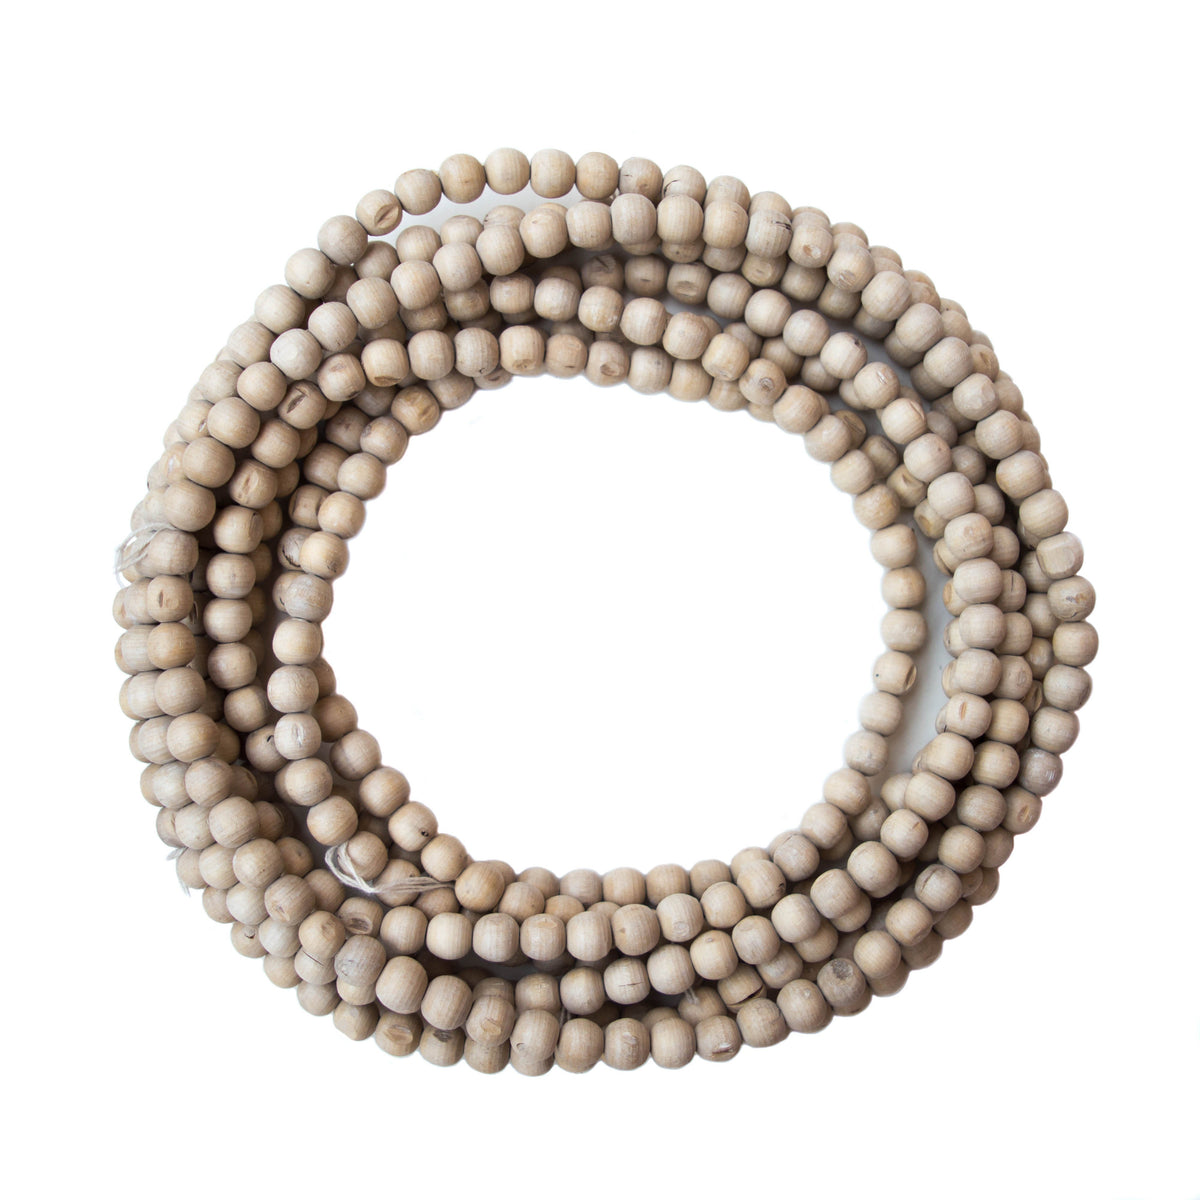 12mm Tulsi Beads Best Quality - Indiodyssey